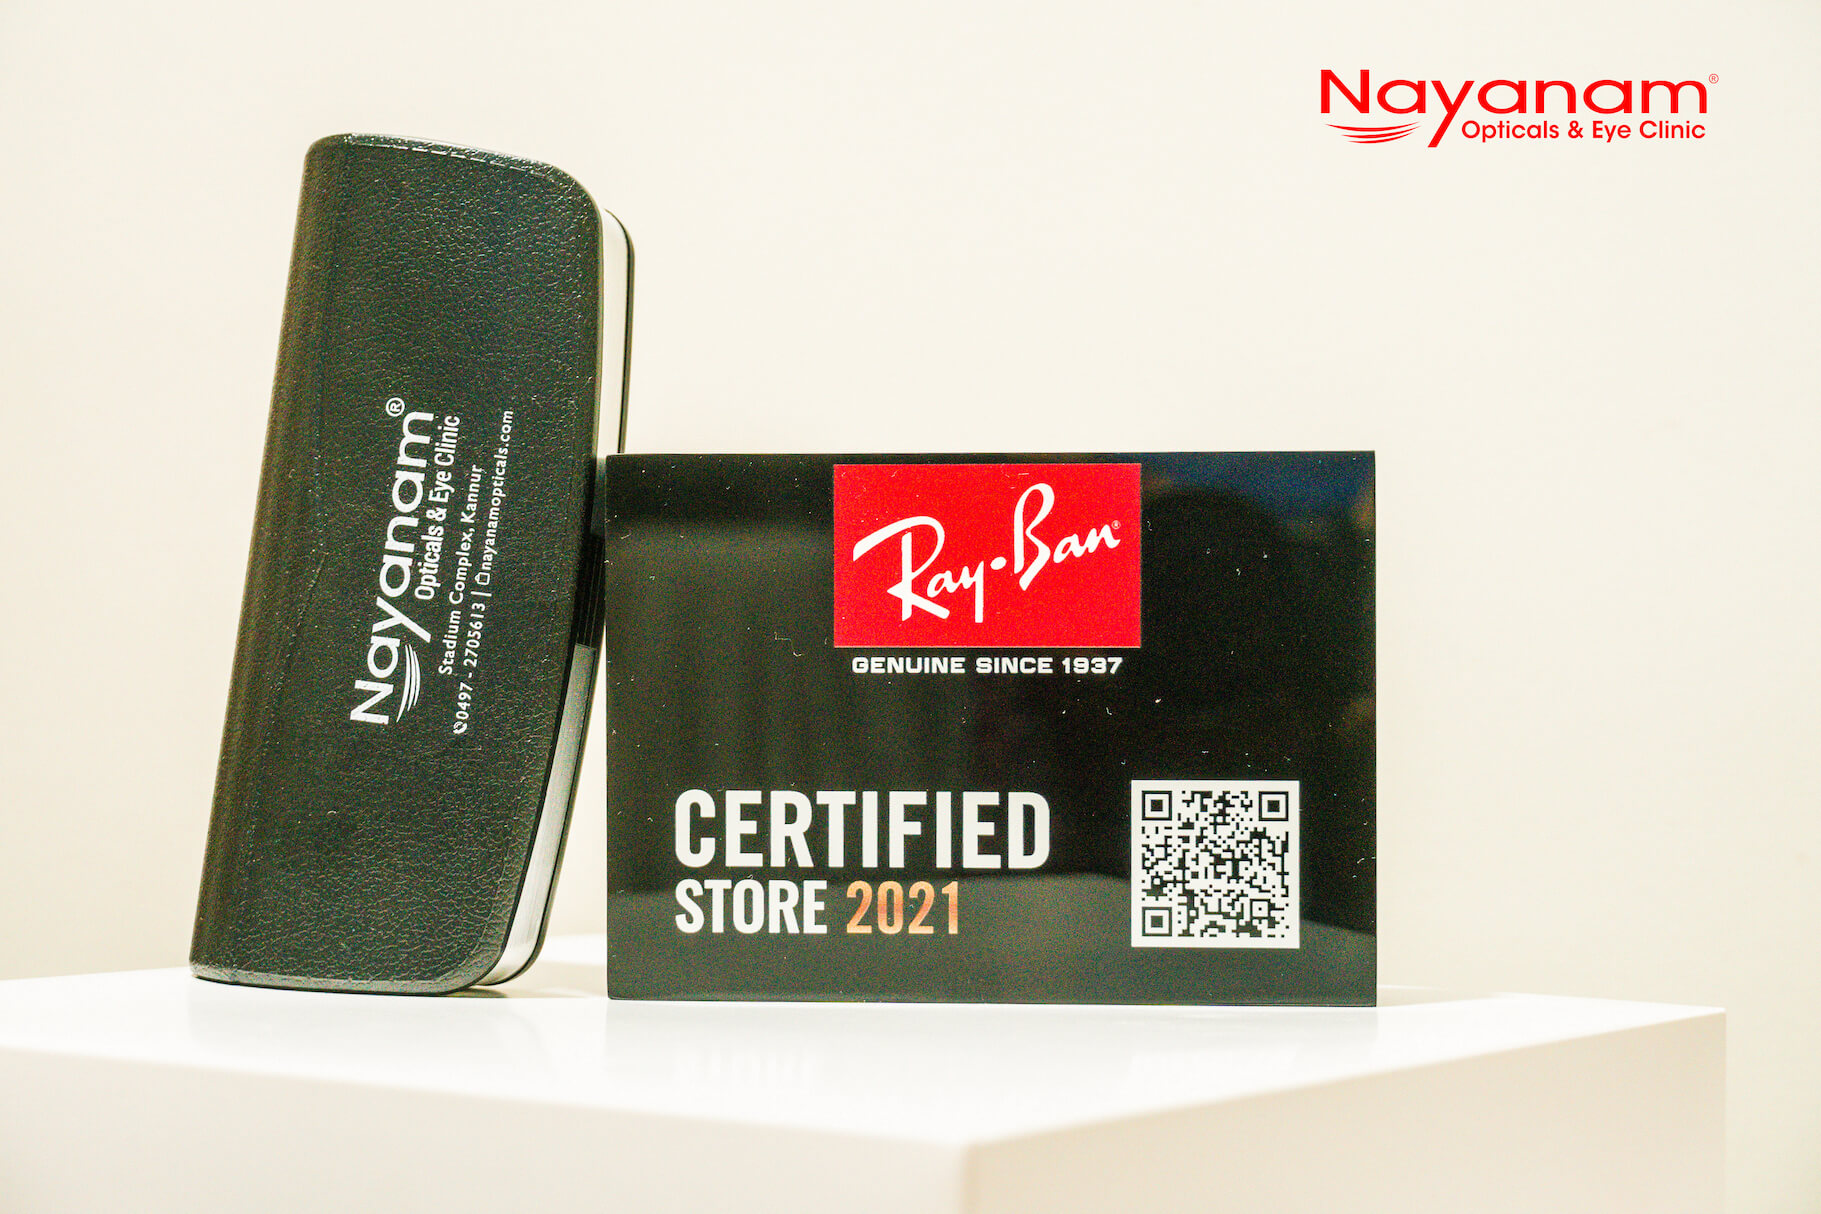 Best Ray Ban Store In Kannur